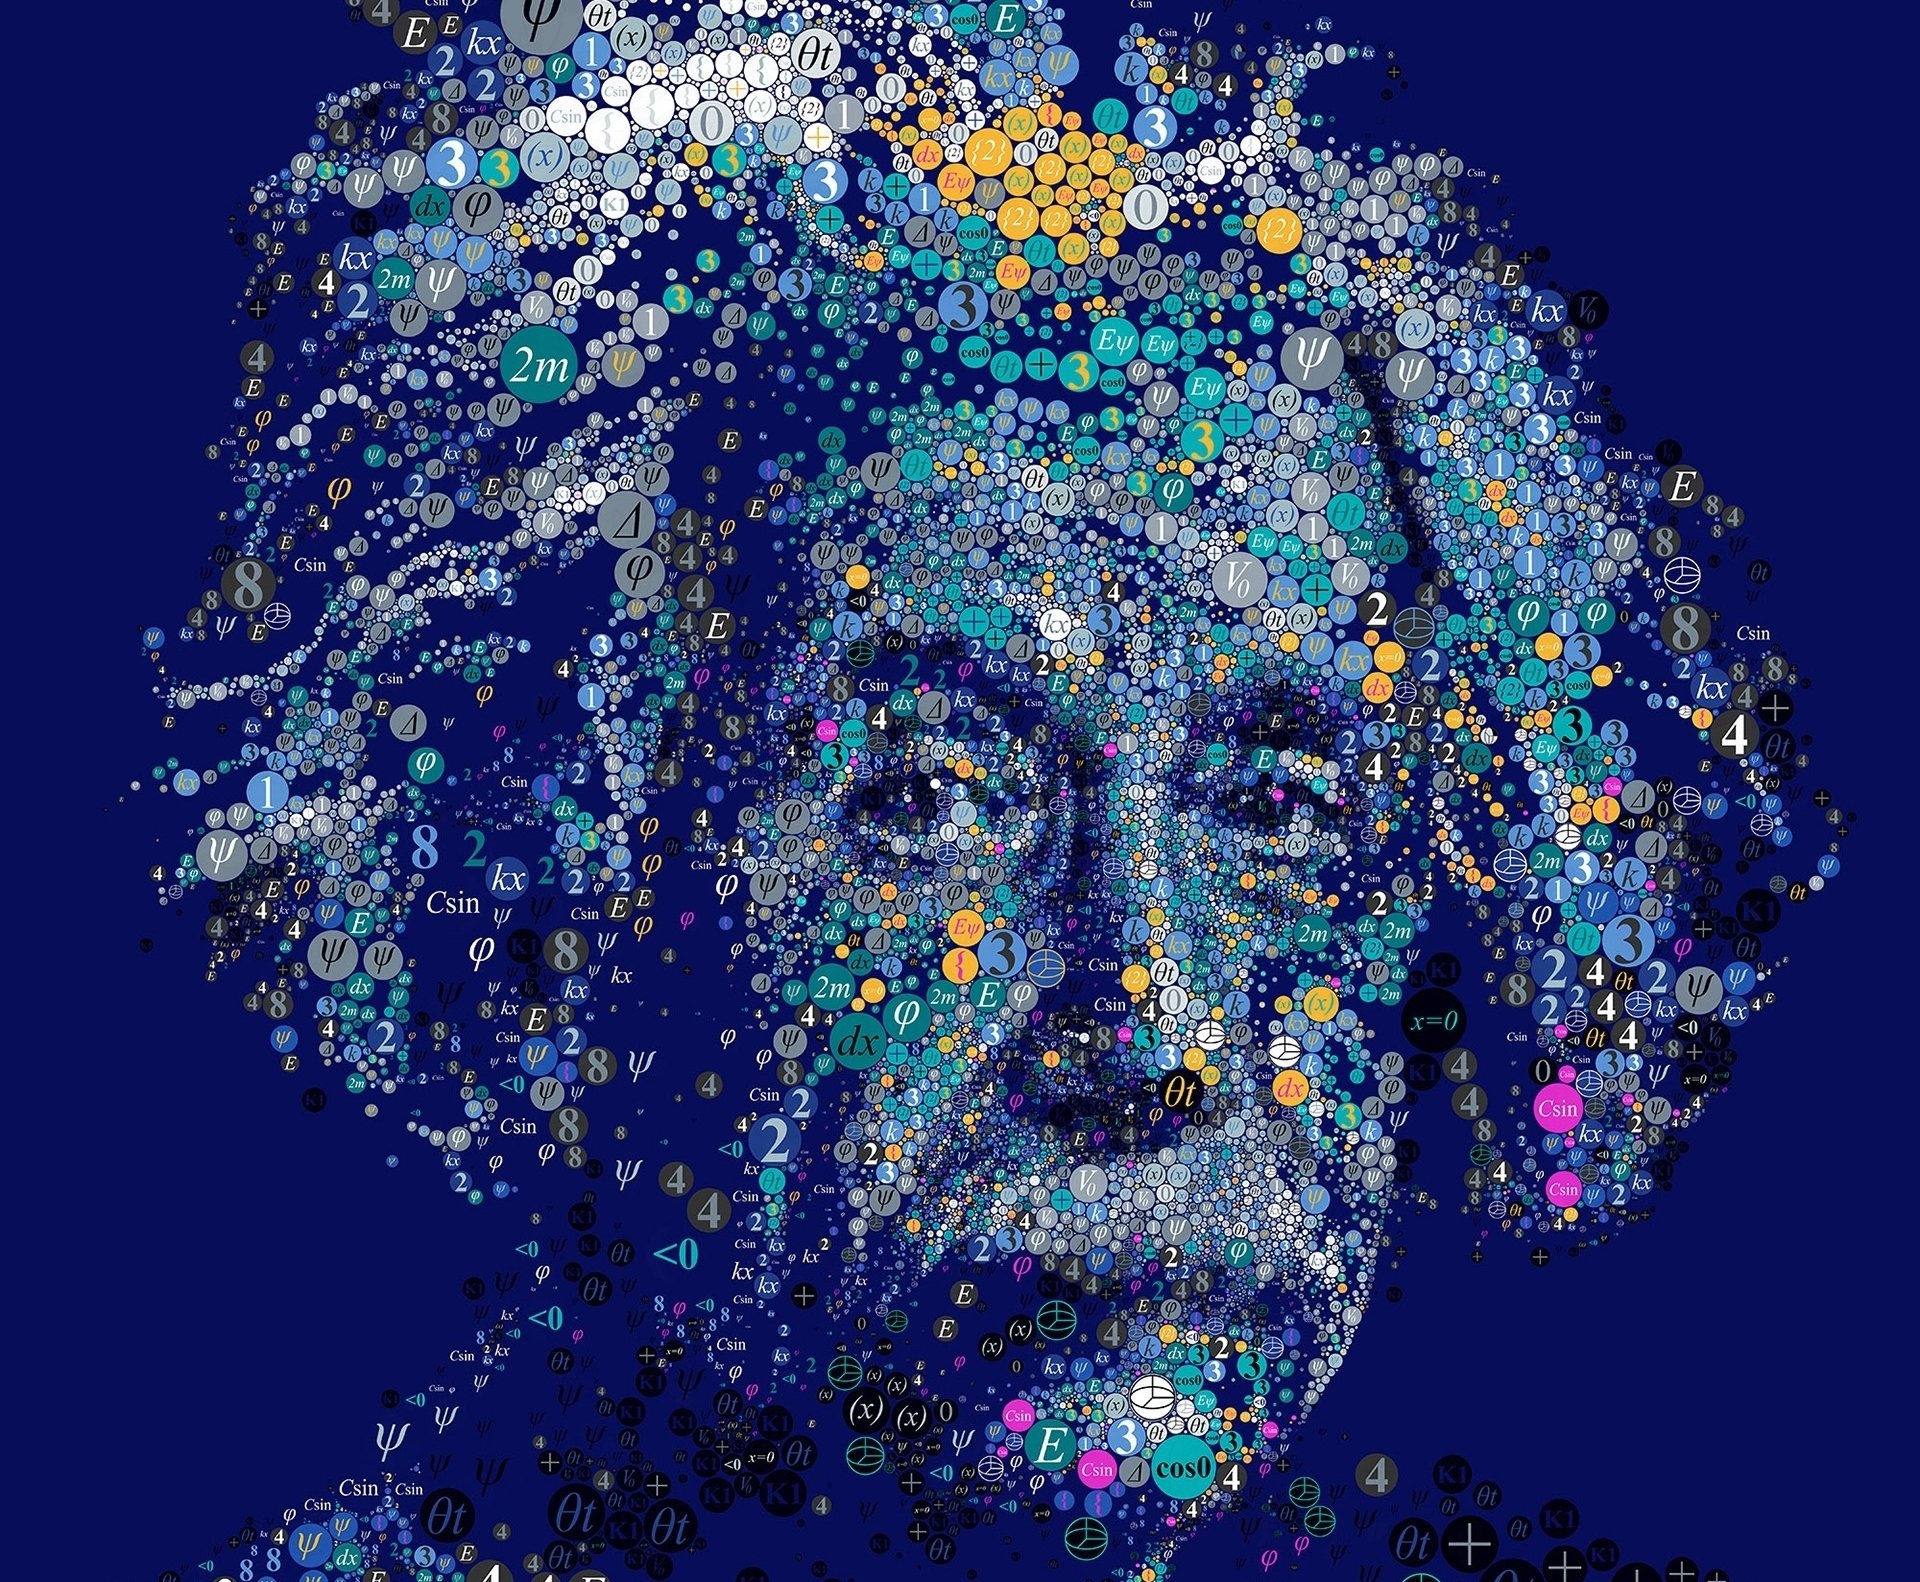 Einstein: The scientist famous for devising his theory of relativity, which revolutionized our understanding of space, time, gravity, and the universe. 1920x1590 HD Wallpaper.